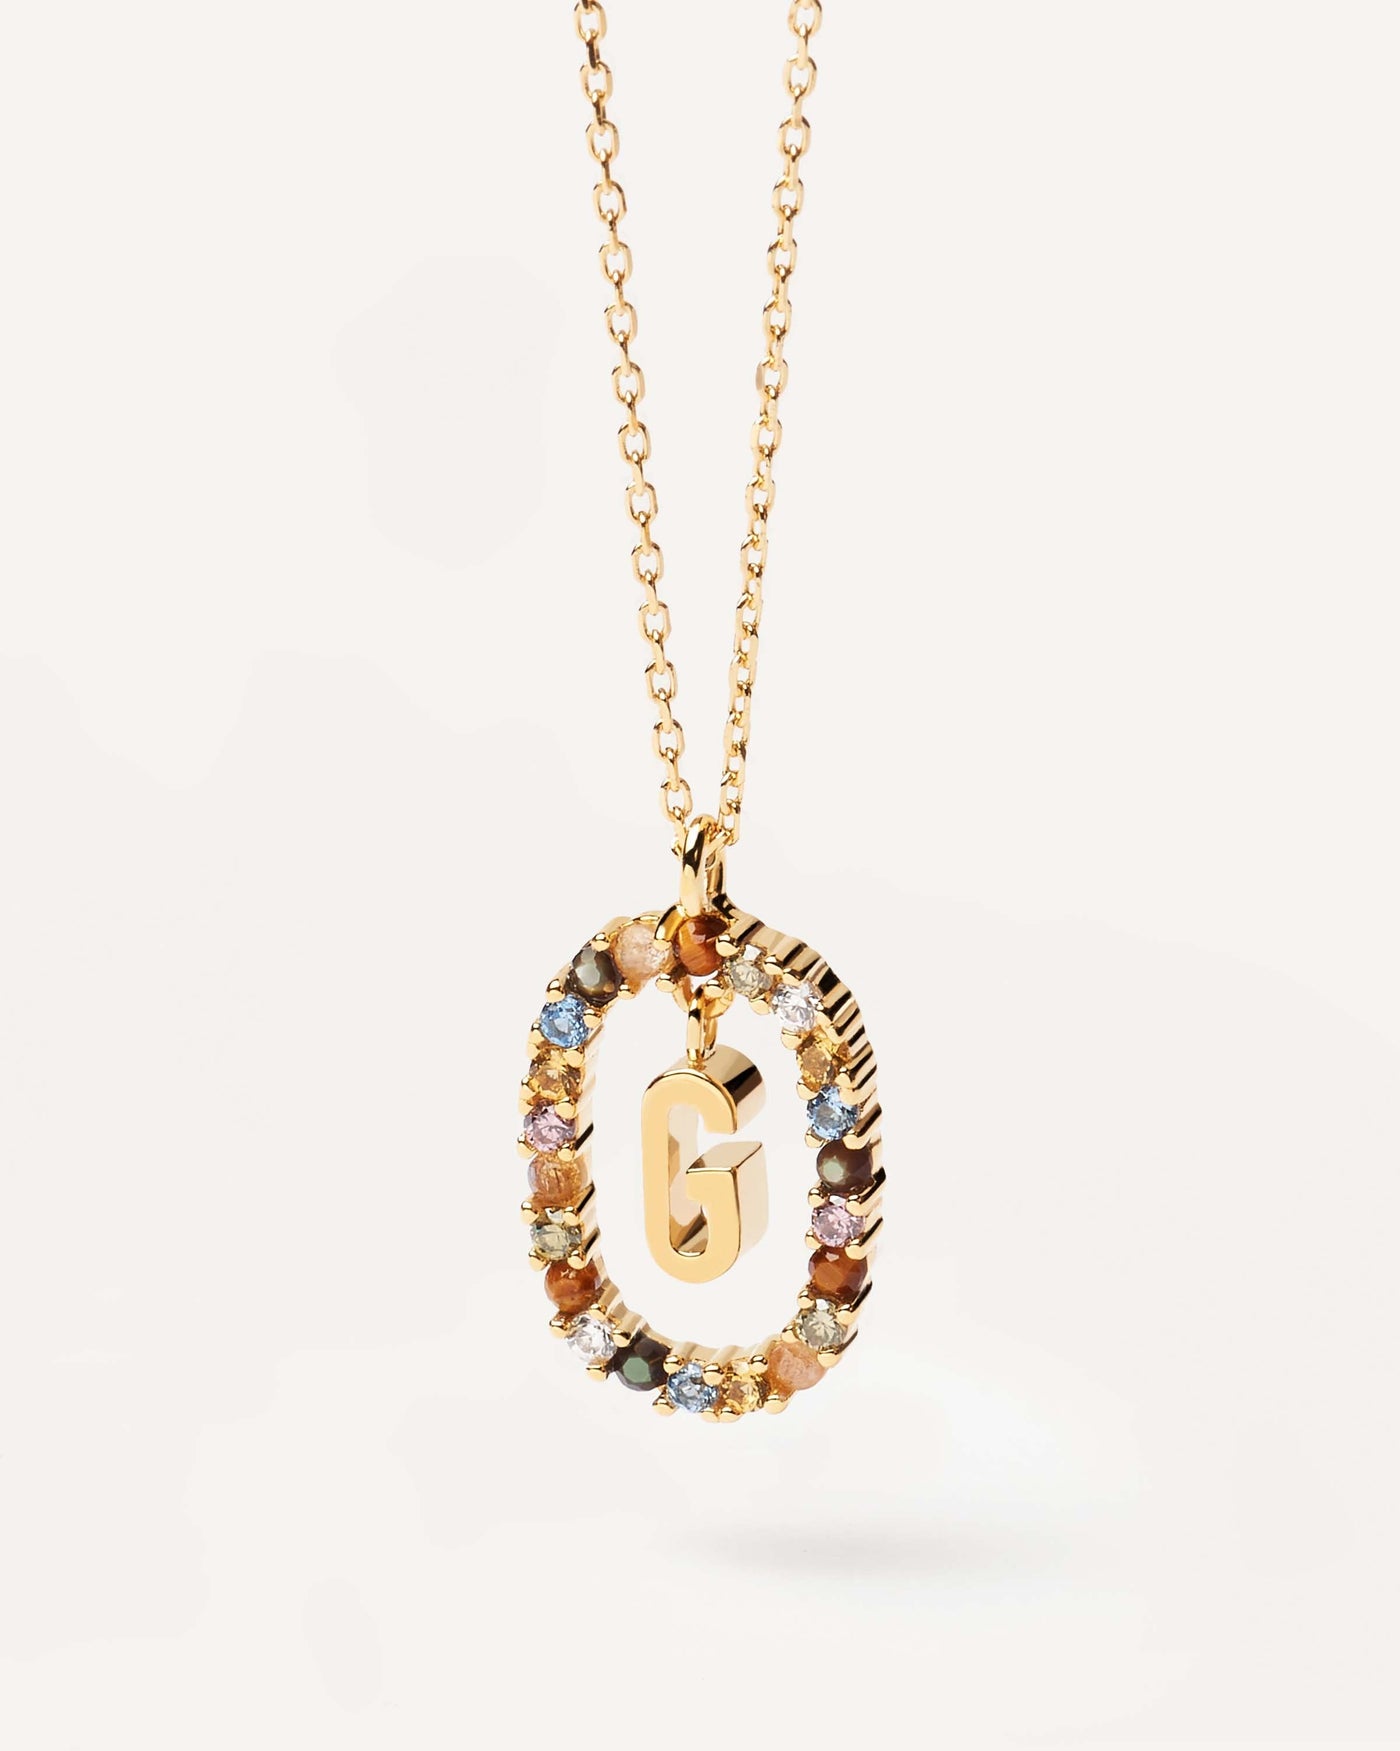 2023 Selection | Letter G necklace. Initial G necklace in gold-plated silver, circled by colorful gemstones. Get the latest arrival from PDPAOLA. Place your order safely and get this Best Seller. Free Shipping.